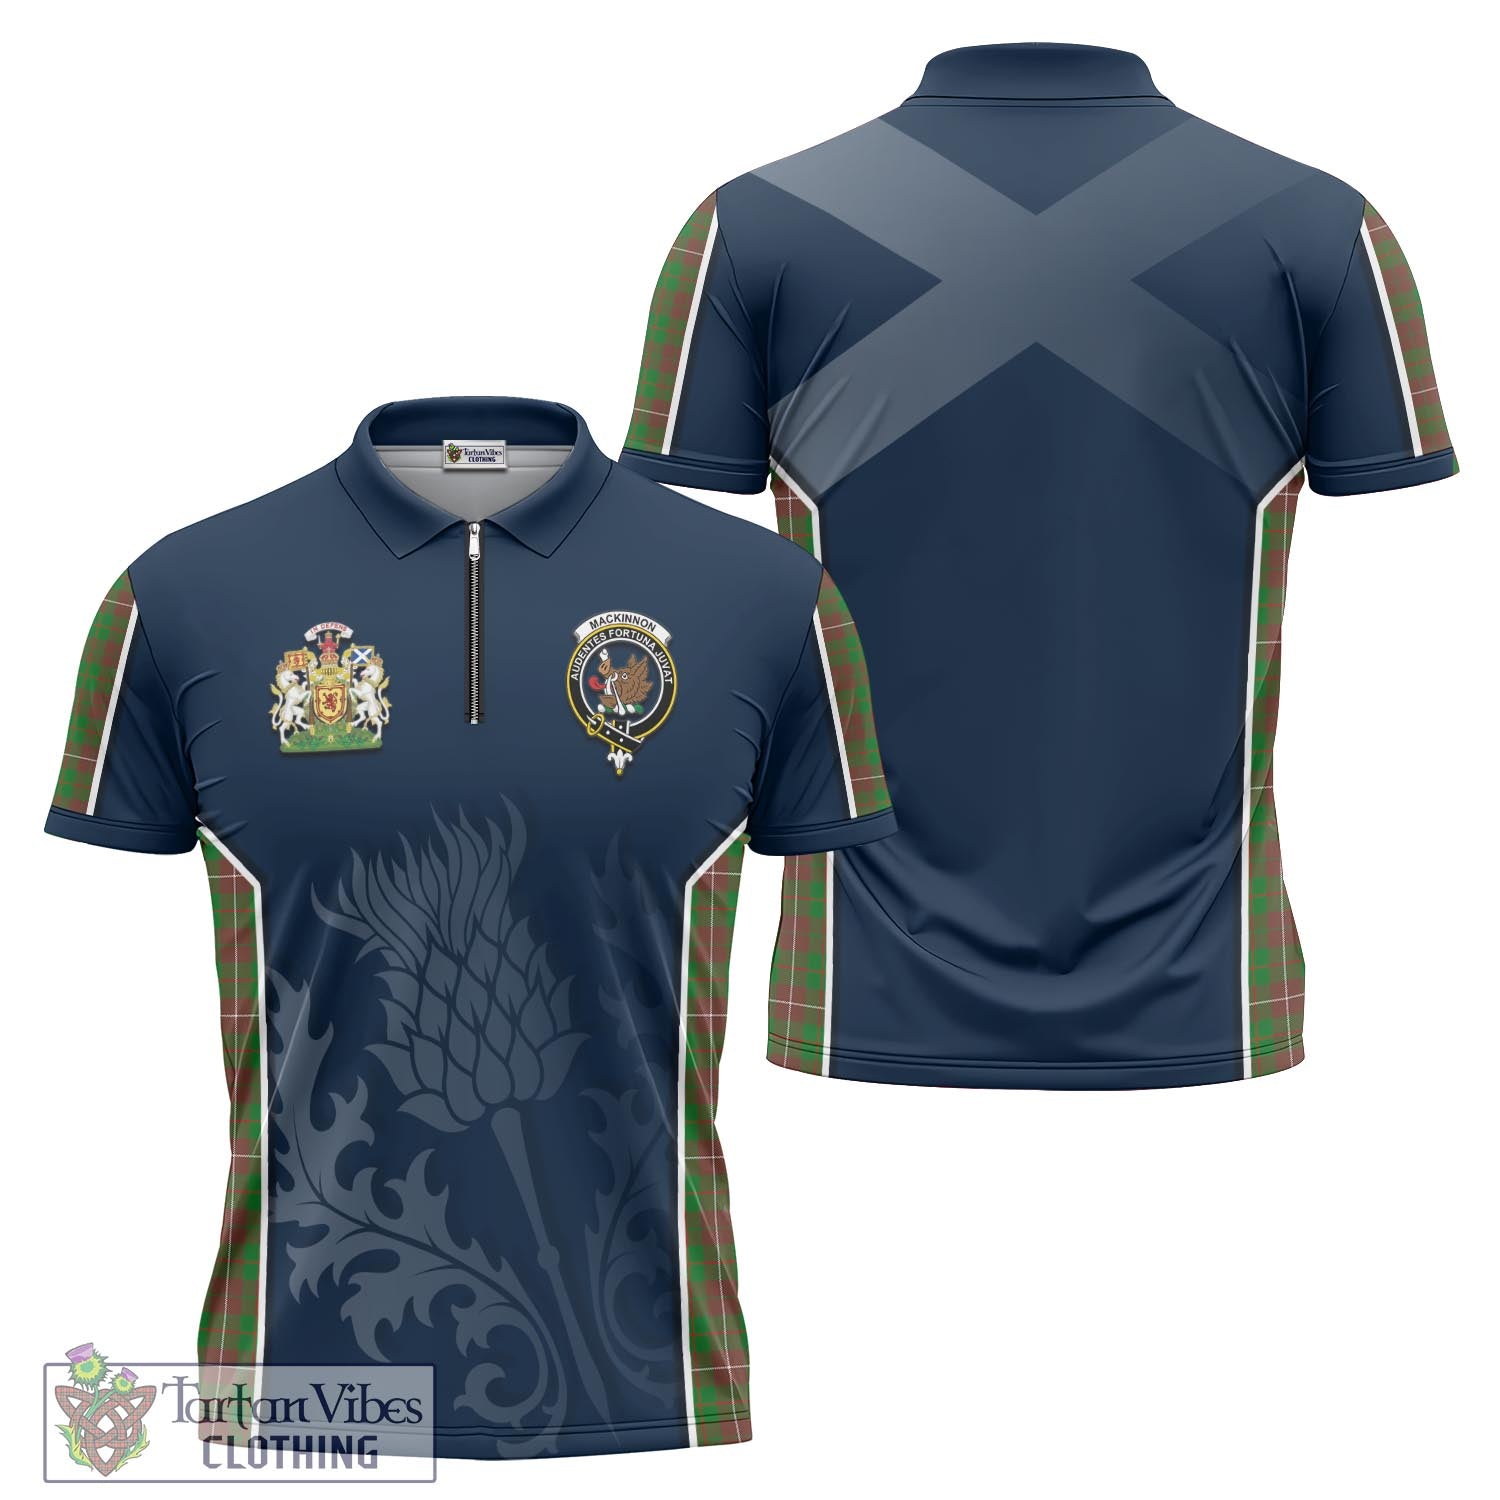 Tartan Vibes Clothing MacKinnon Hunting Modern Tartan Zipper Polo Shirt with Family Crest and Scottish Thistle Vibes Sport Style